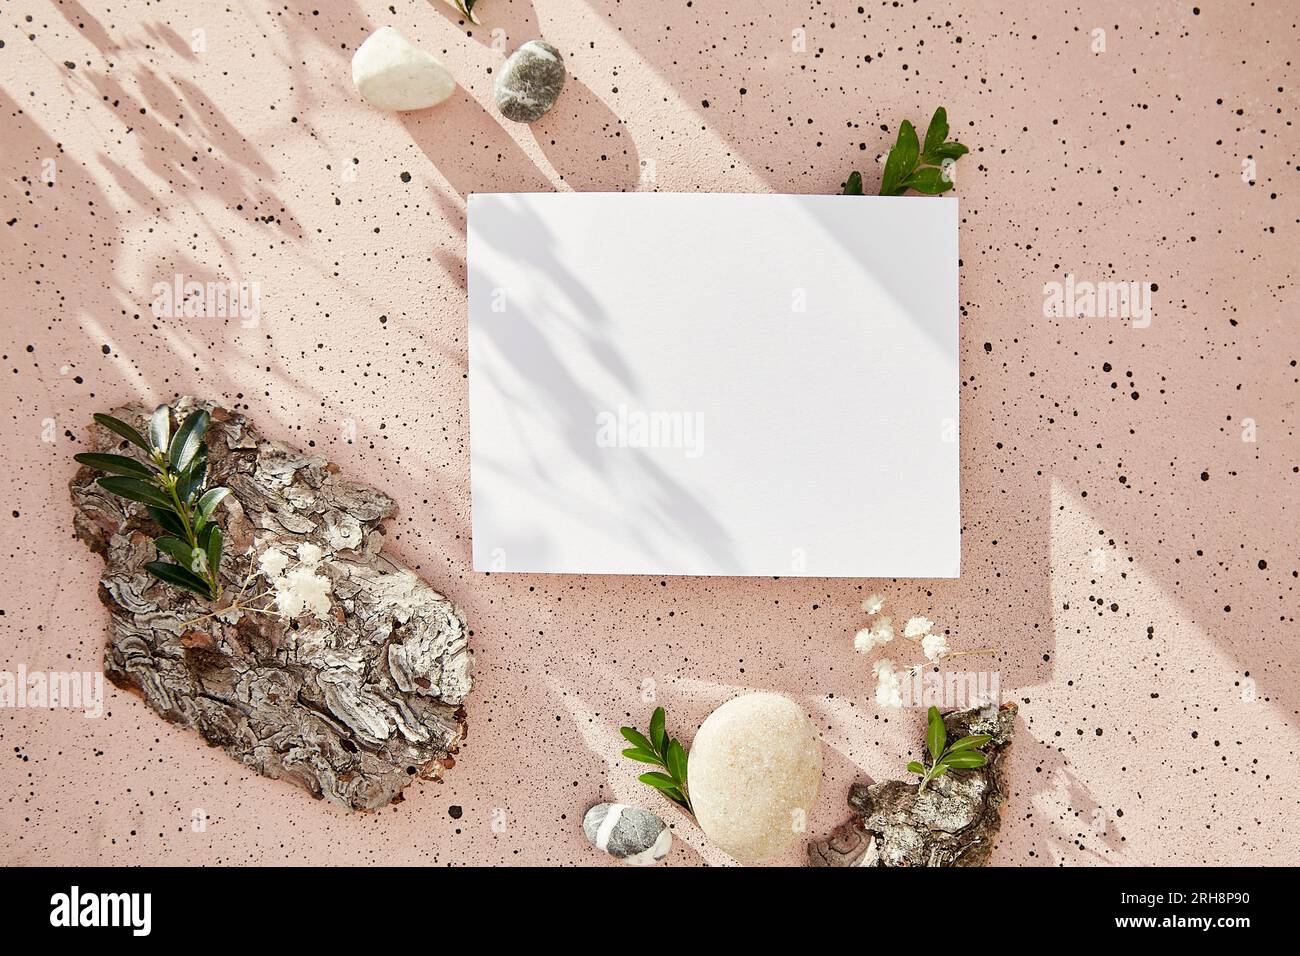 Sustainable, recycling, mock up, stationery card among natural tree bark, leaves, pebbles under shadows. Place for your text. Stock Photo